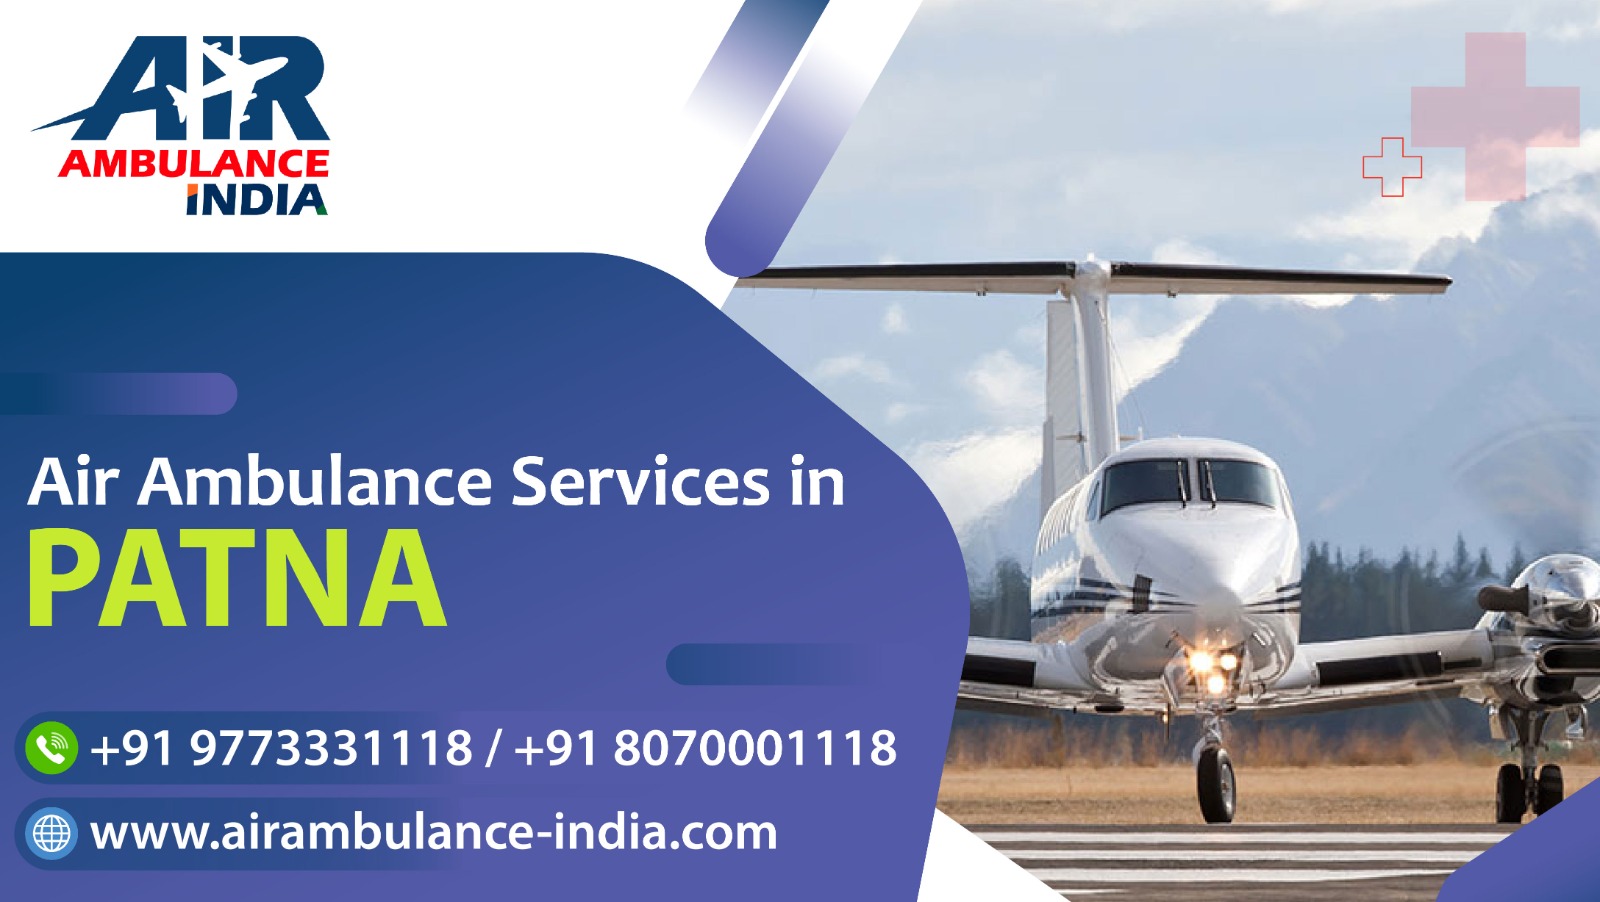 Air Ambulance Services in Patna